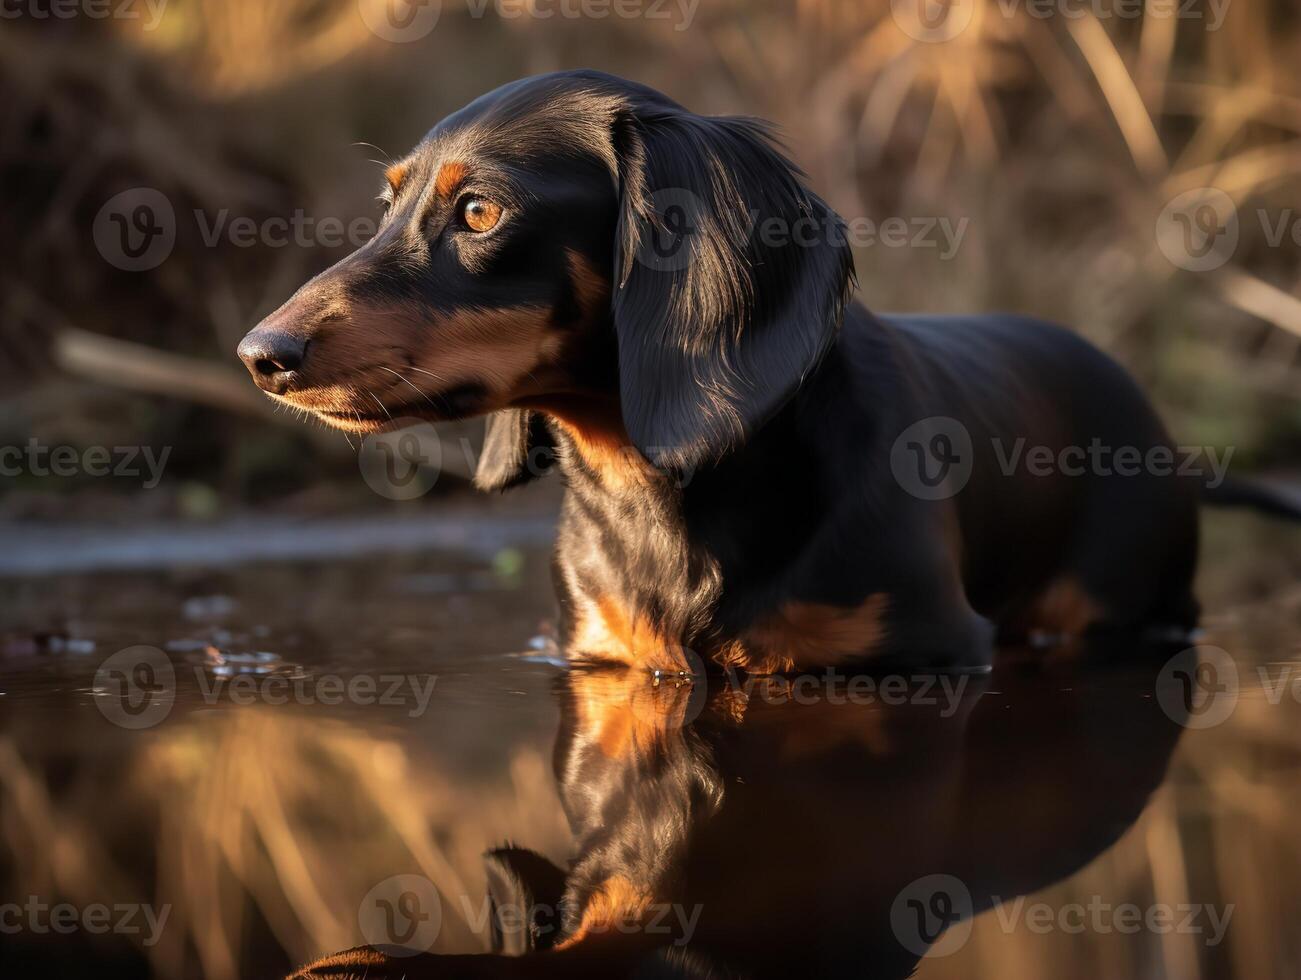 The Diligent Dachshund and His Reflection photo